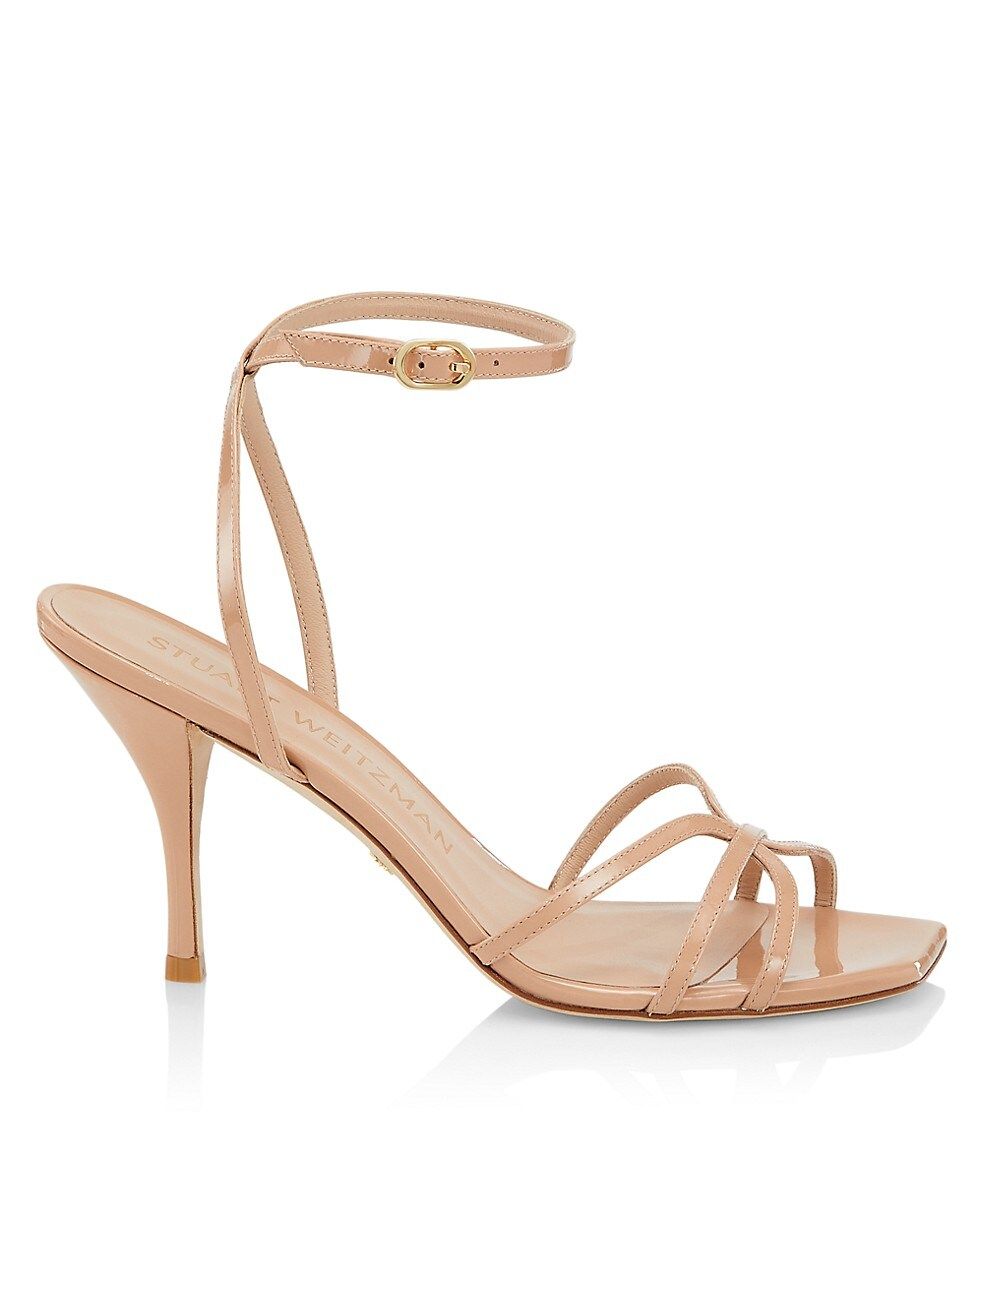 Stuart Weitzman Barely There Patent-Leather Strappy Sandals | Saks Fifth Avenue